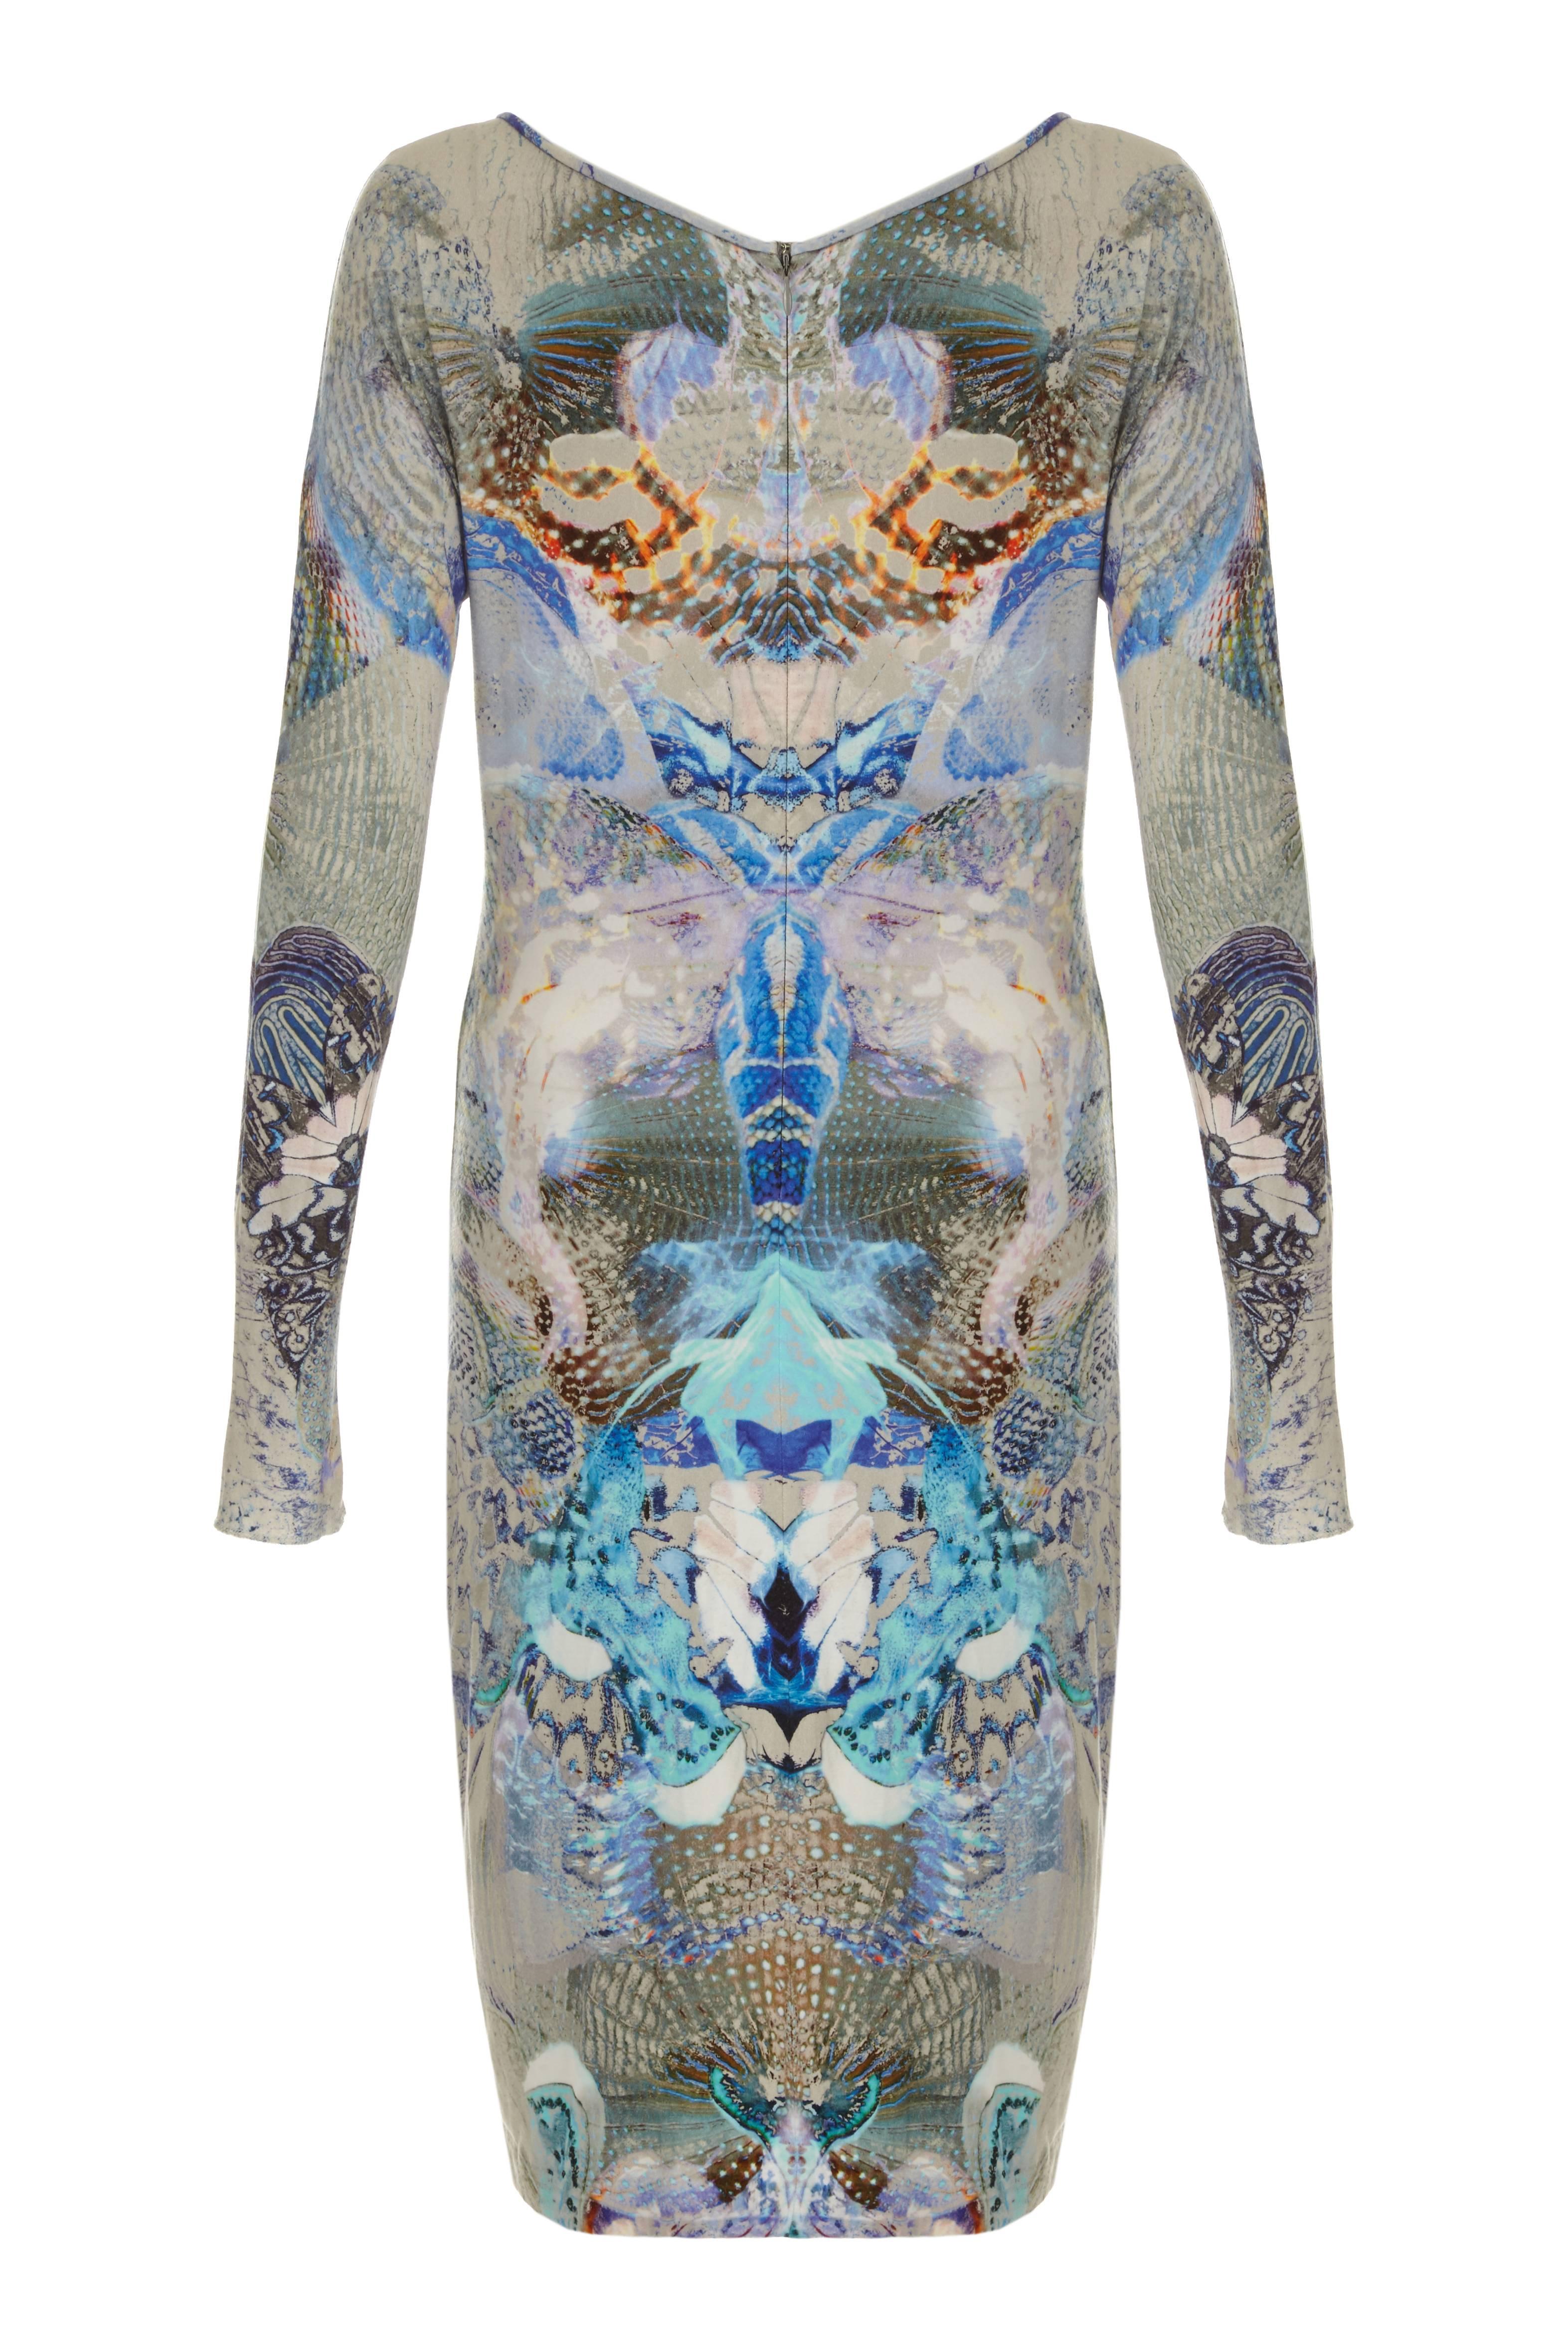 A rare and super collectable Alexandre McQueen dress from Lee McQueens very last collection Plato's Atlantis, Spring/ Summer 2010. This long sleeved jersey dress, made up of 94% viscose and 6% elastane is printed in blues, greys and orange. It